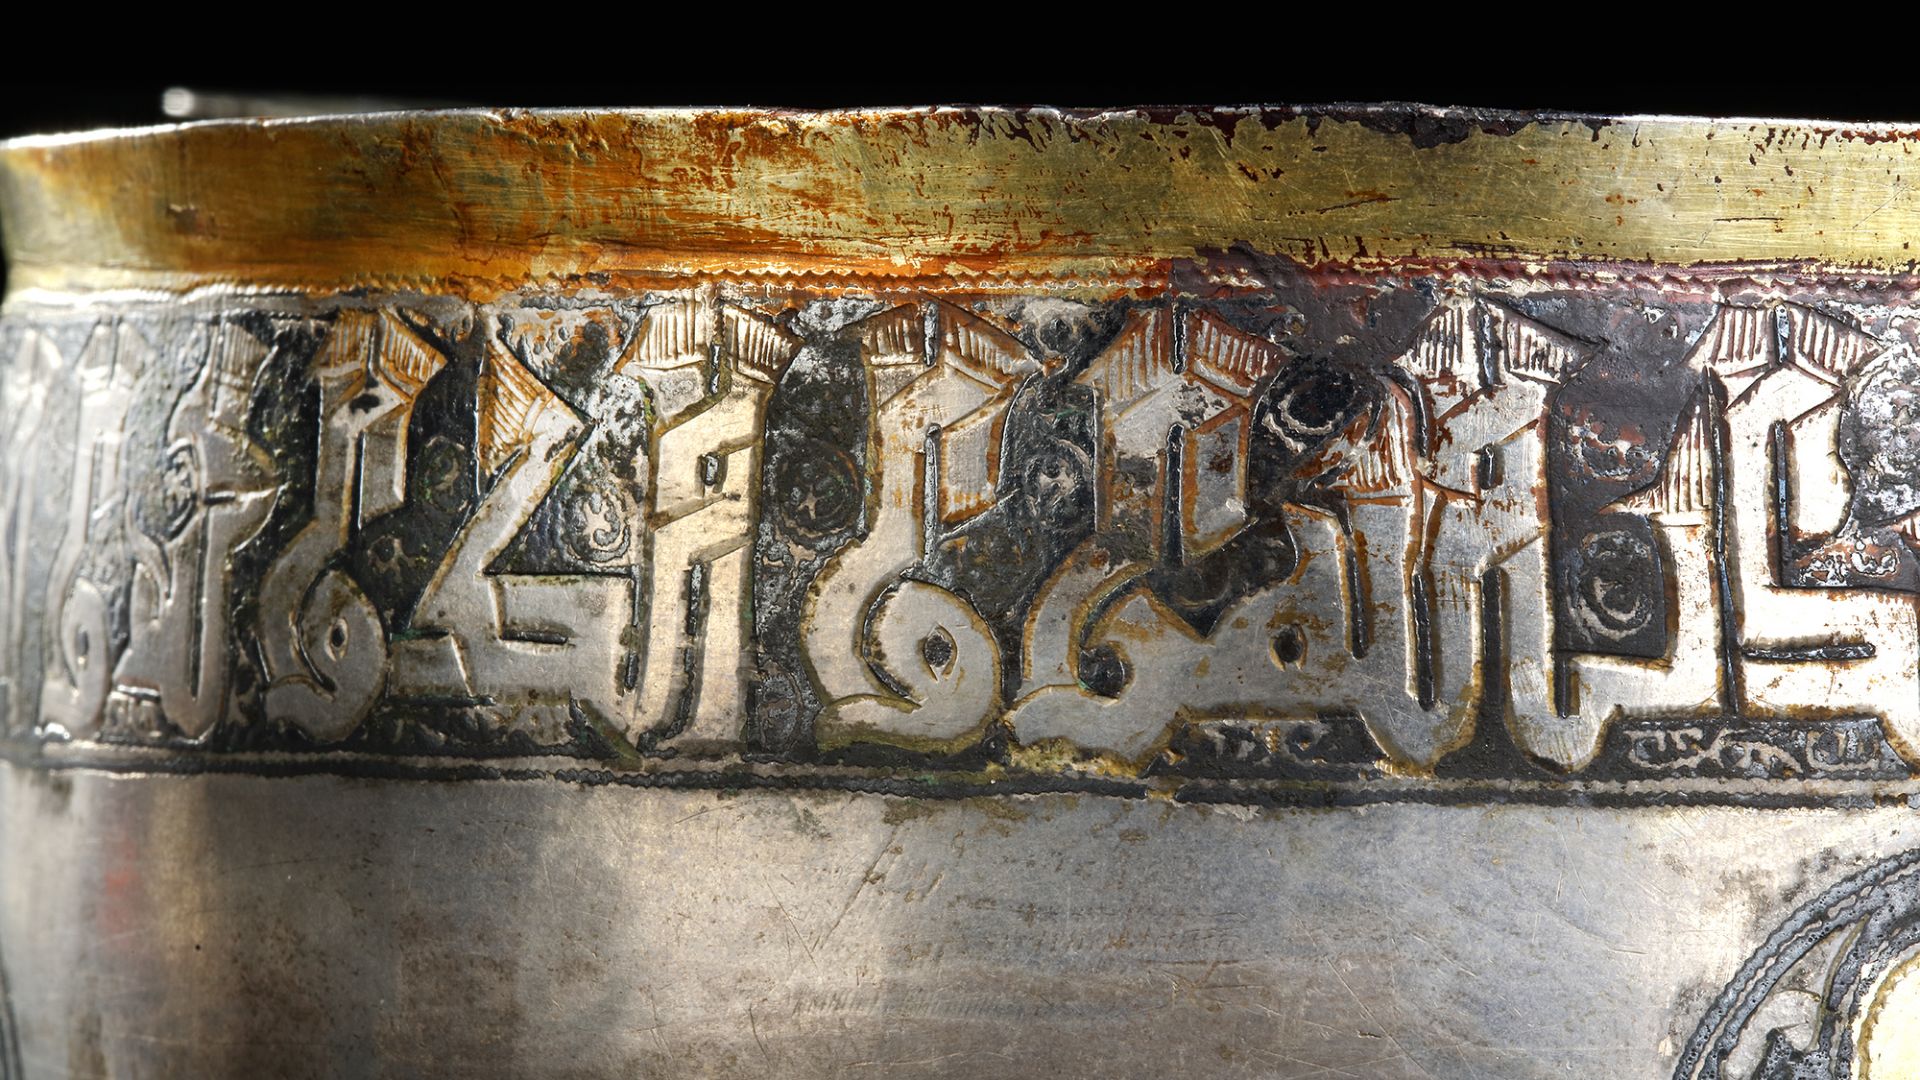 A RARE SILVER AND NIELLOED CUP WITH KUFIC INSCRIPTION, PERSIA OR CENTRAL ASIA, 11TH-12TH CENTURY - Image 30 of 34